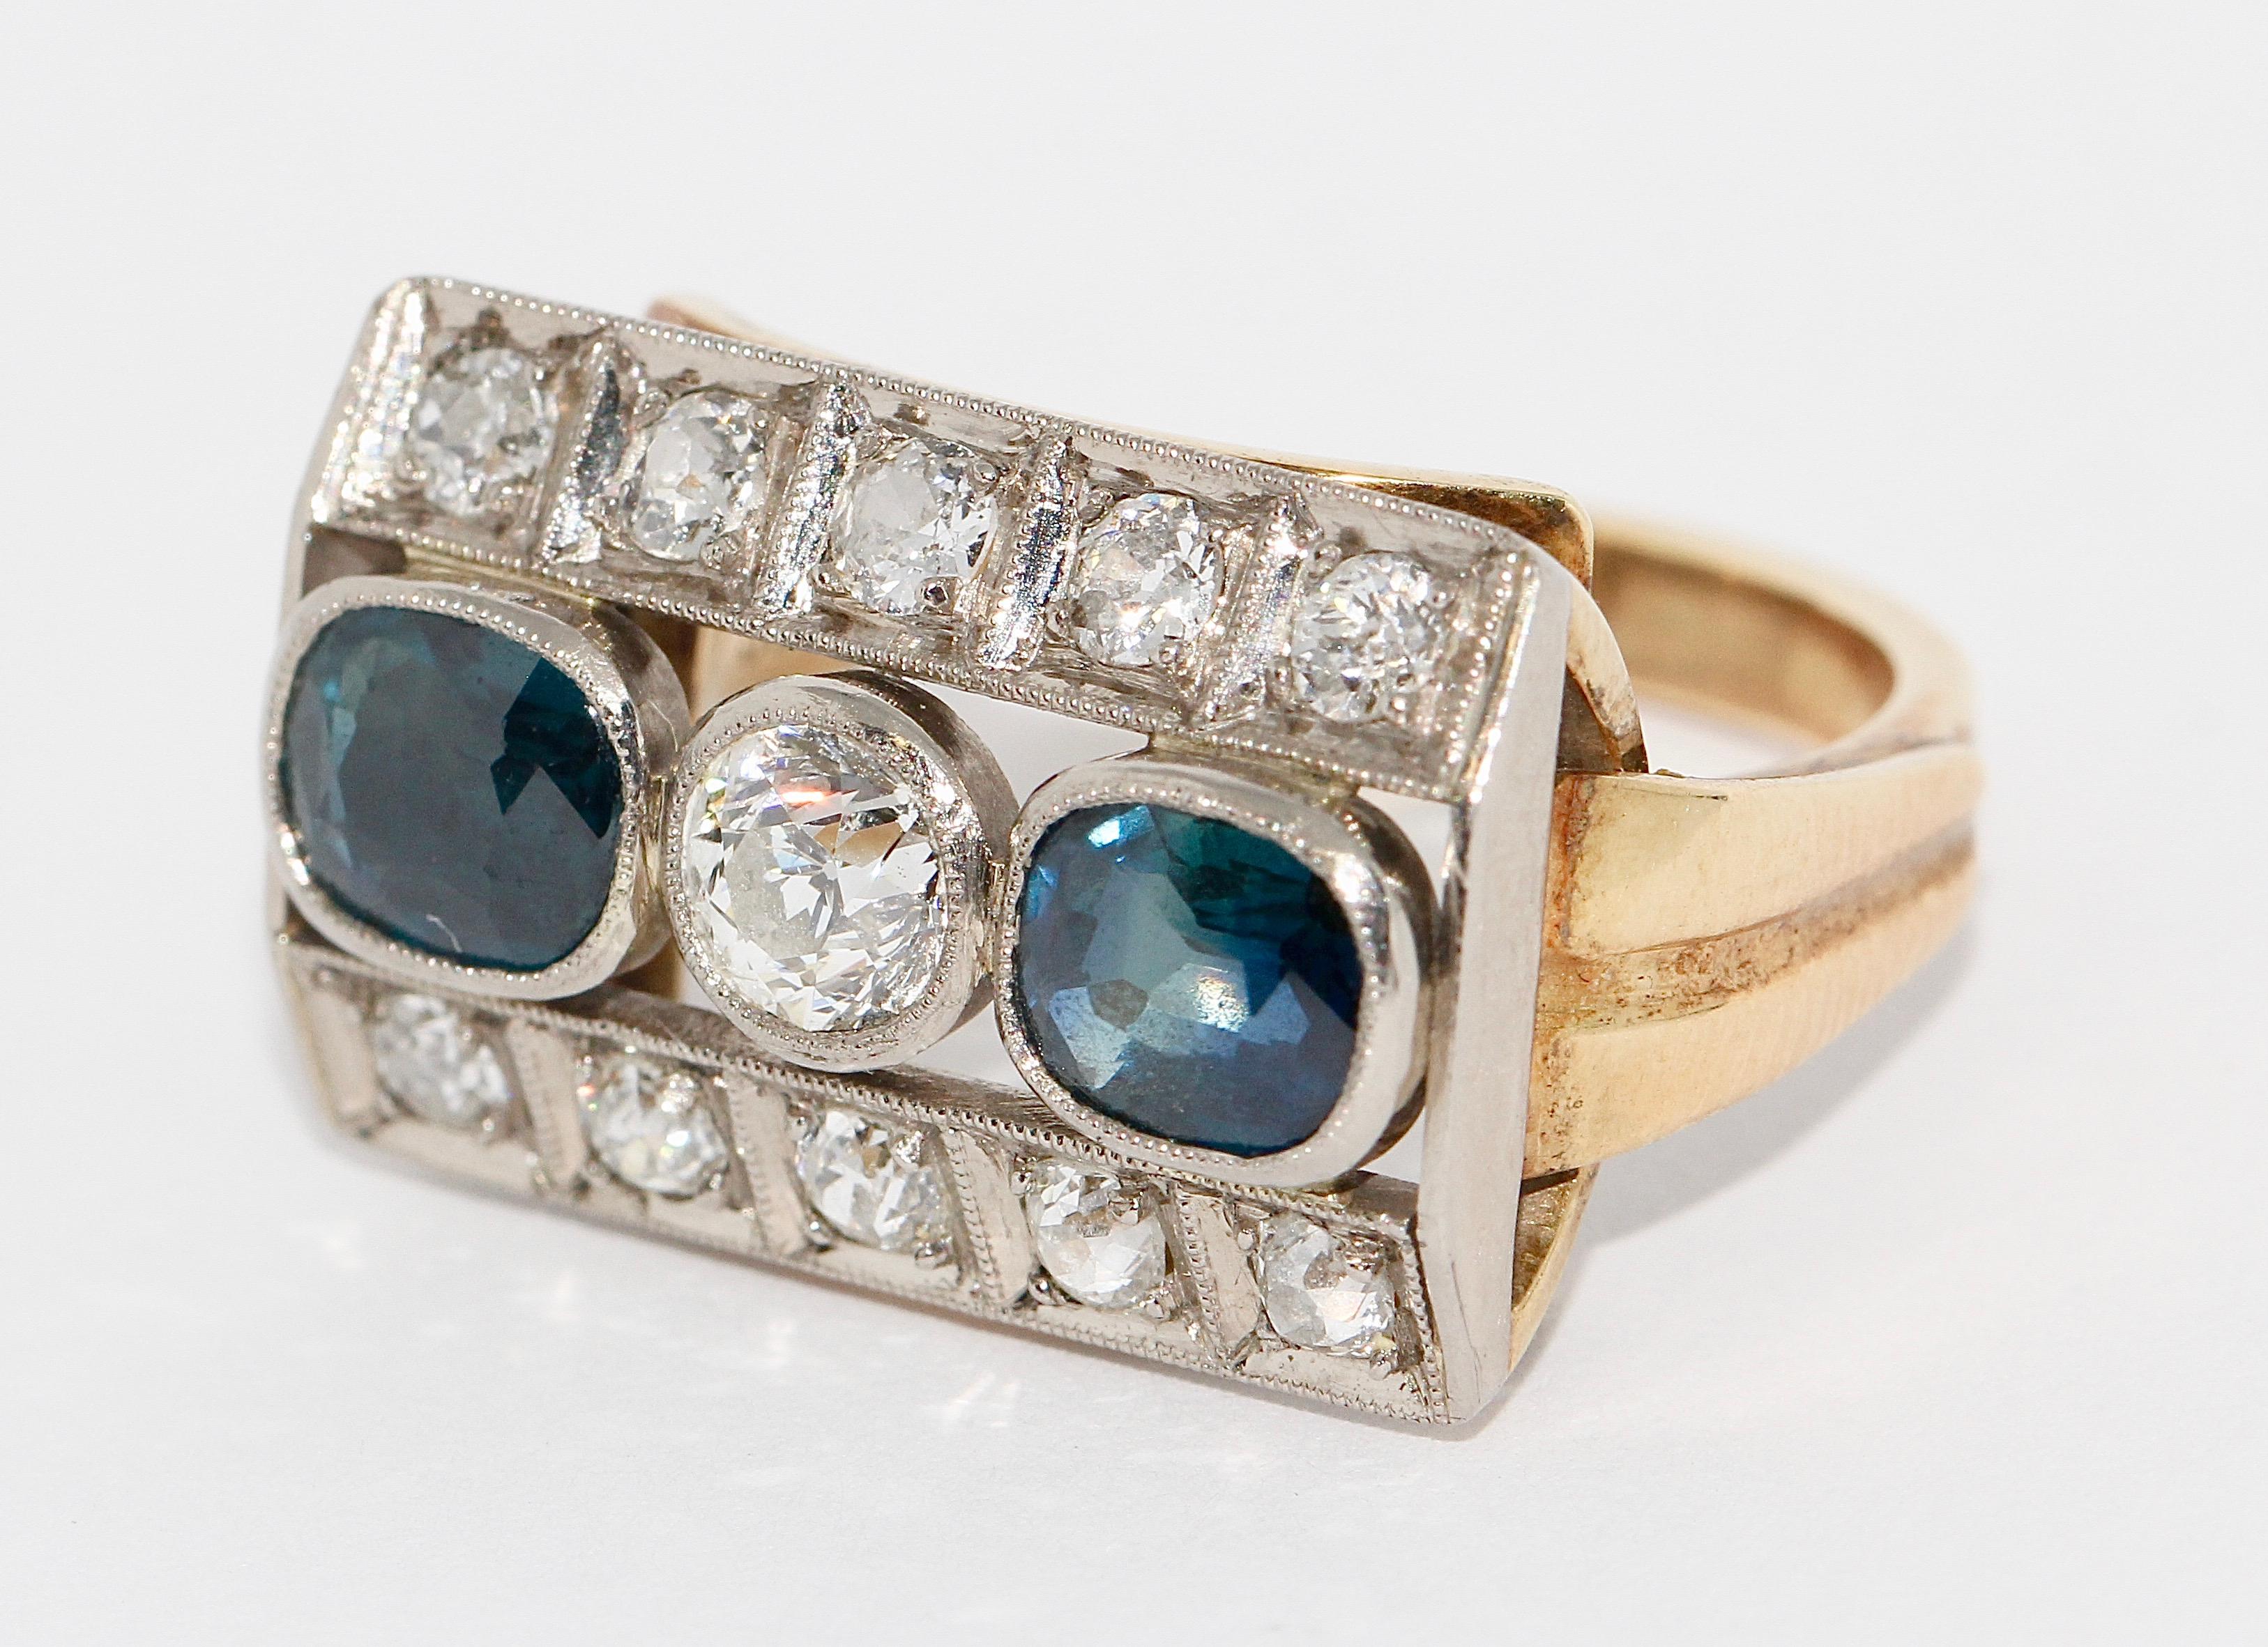 Antique ladies gold ring, with sapphires and diamonds.

The central diamond solitaire has about 0.4 carats.

US ring size about 6 1/2.

Including certificate of authenticity.